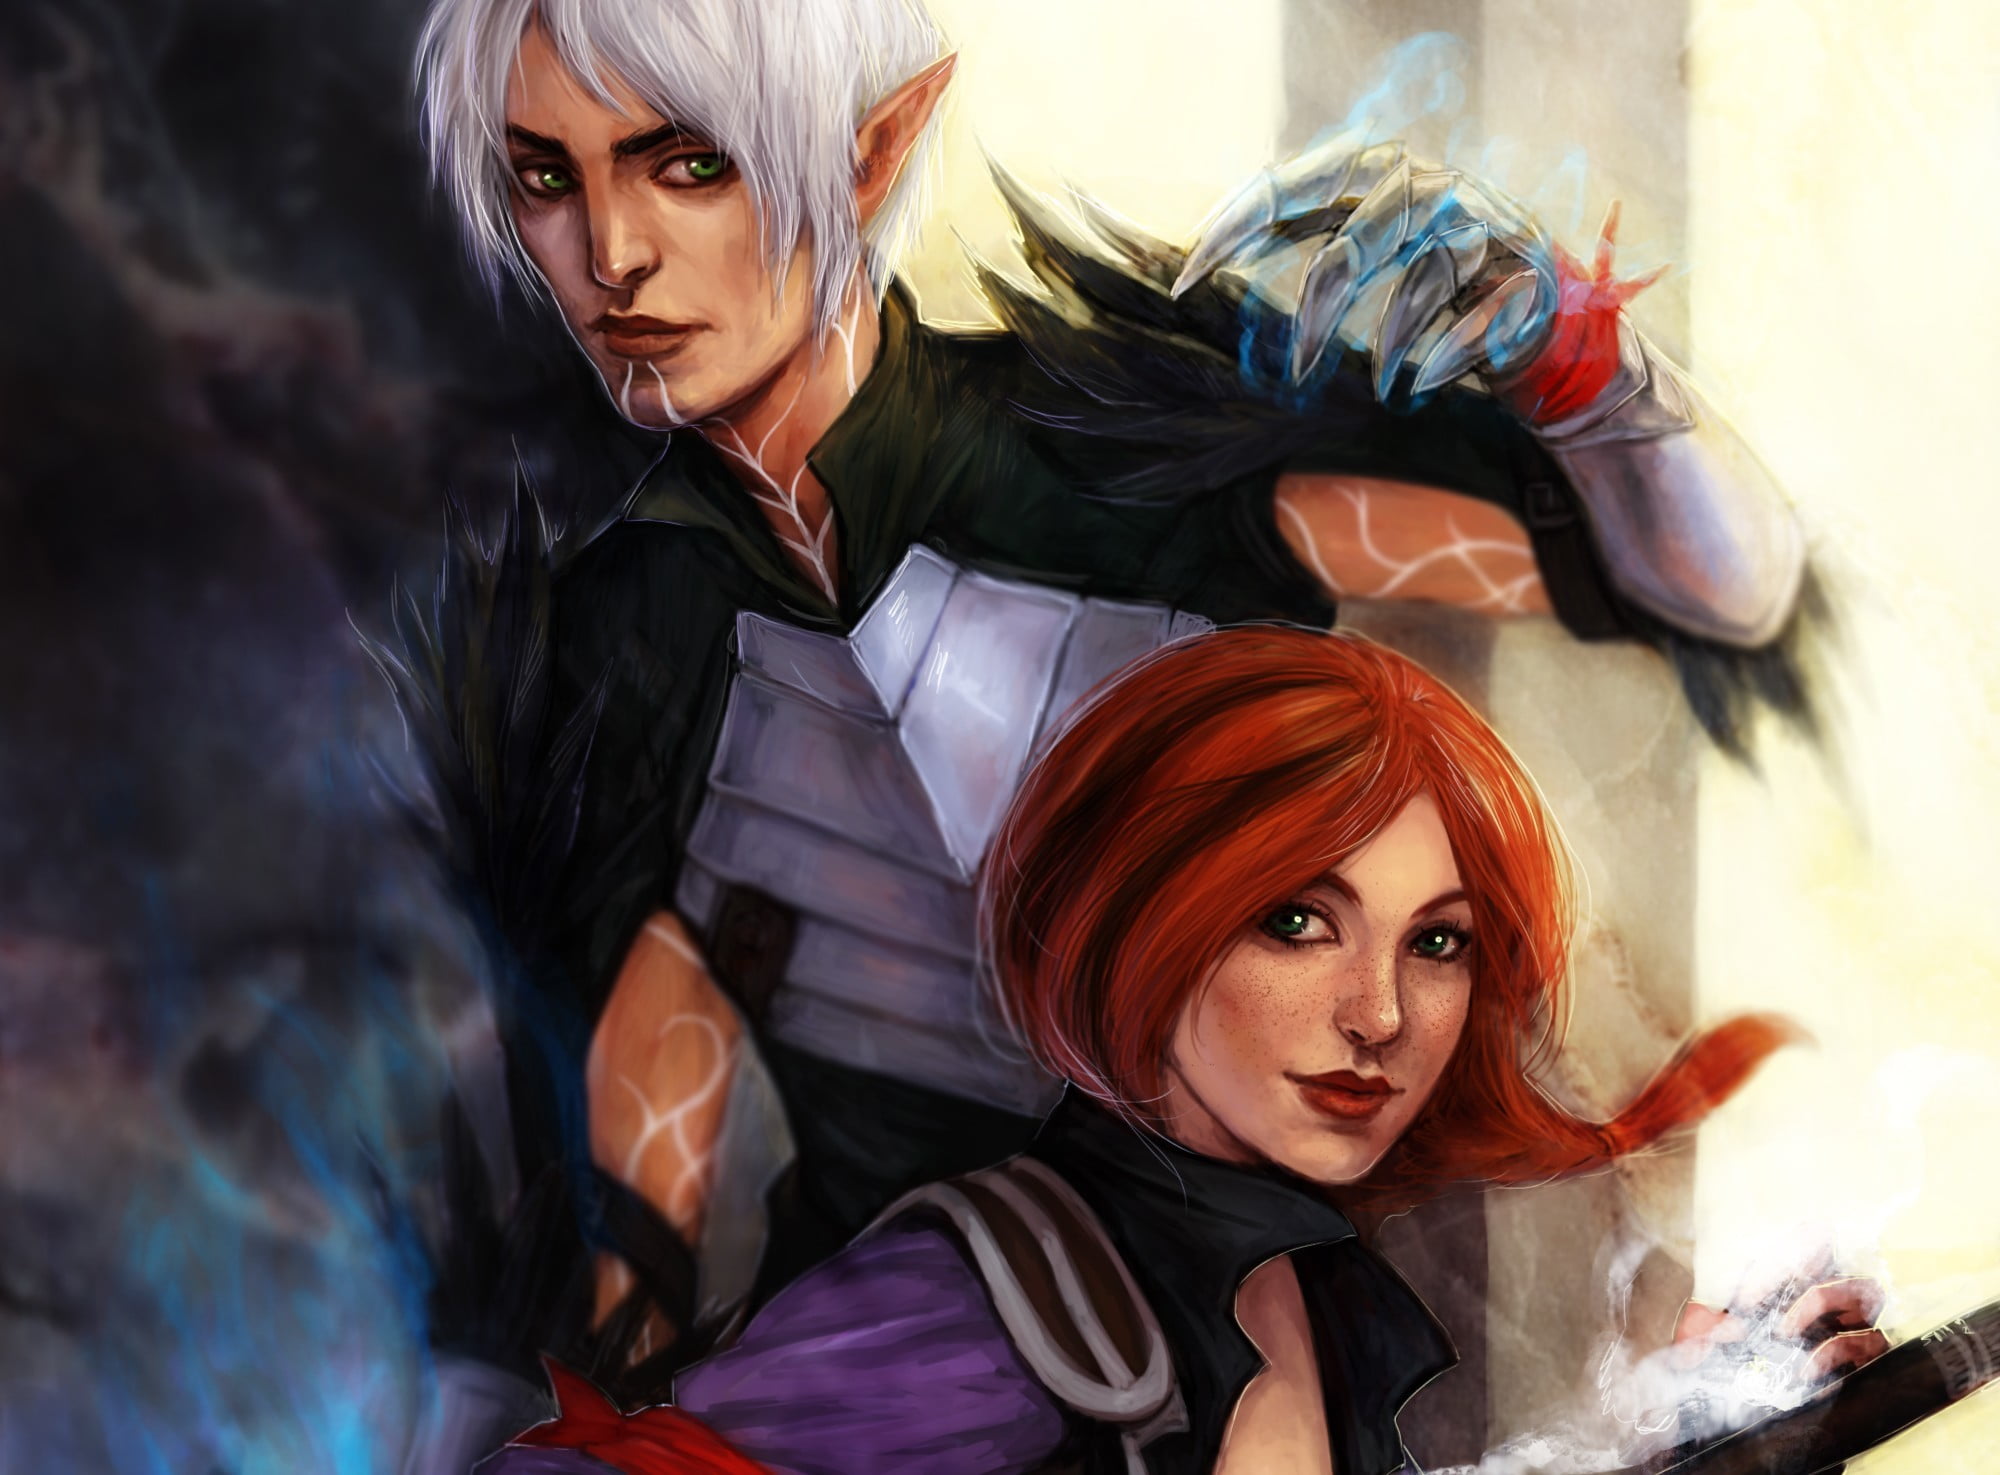 male and female anime characters illustration, dragon age, hawke